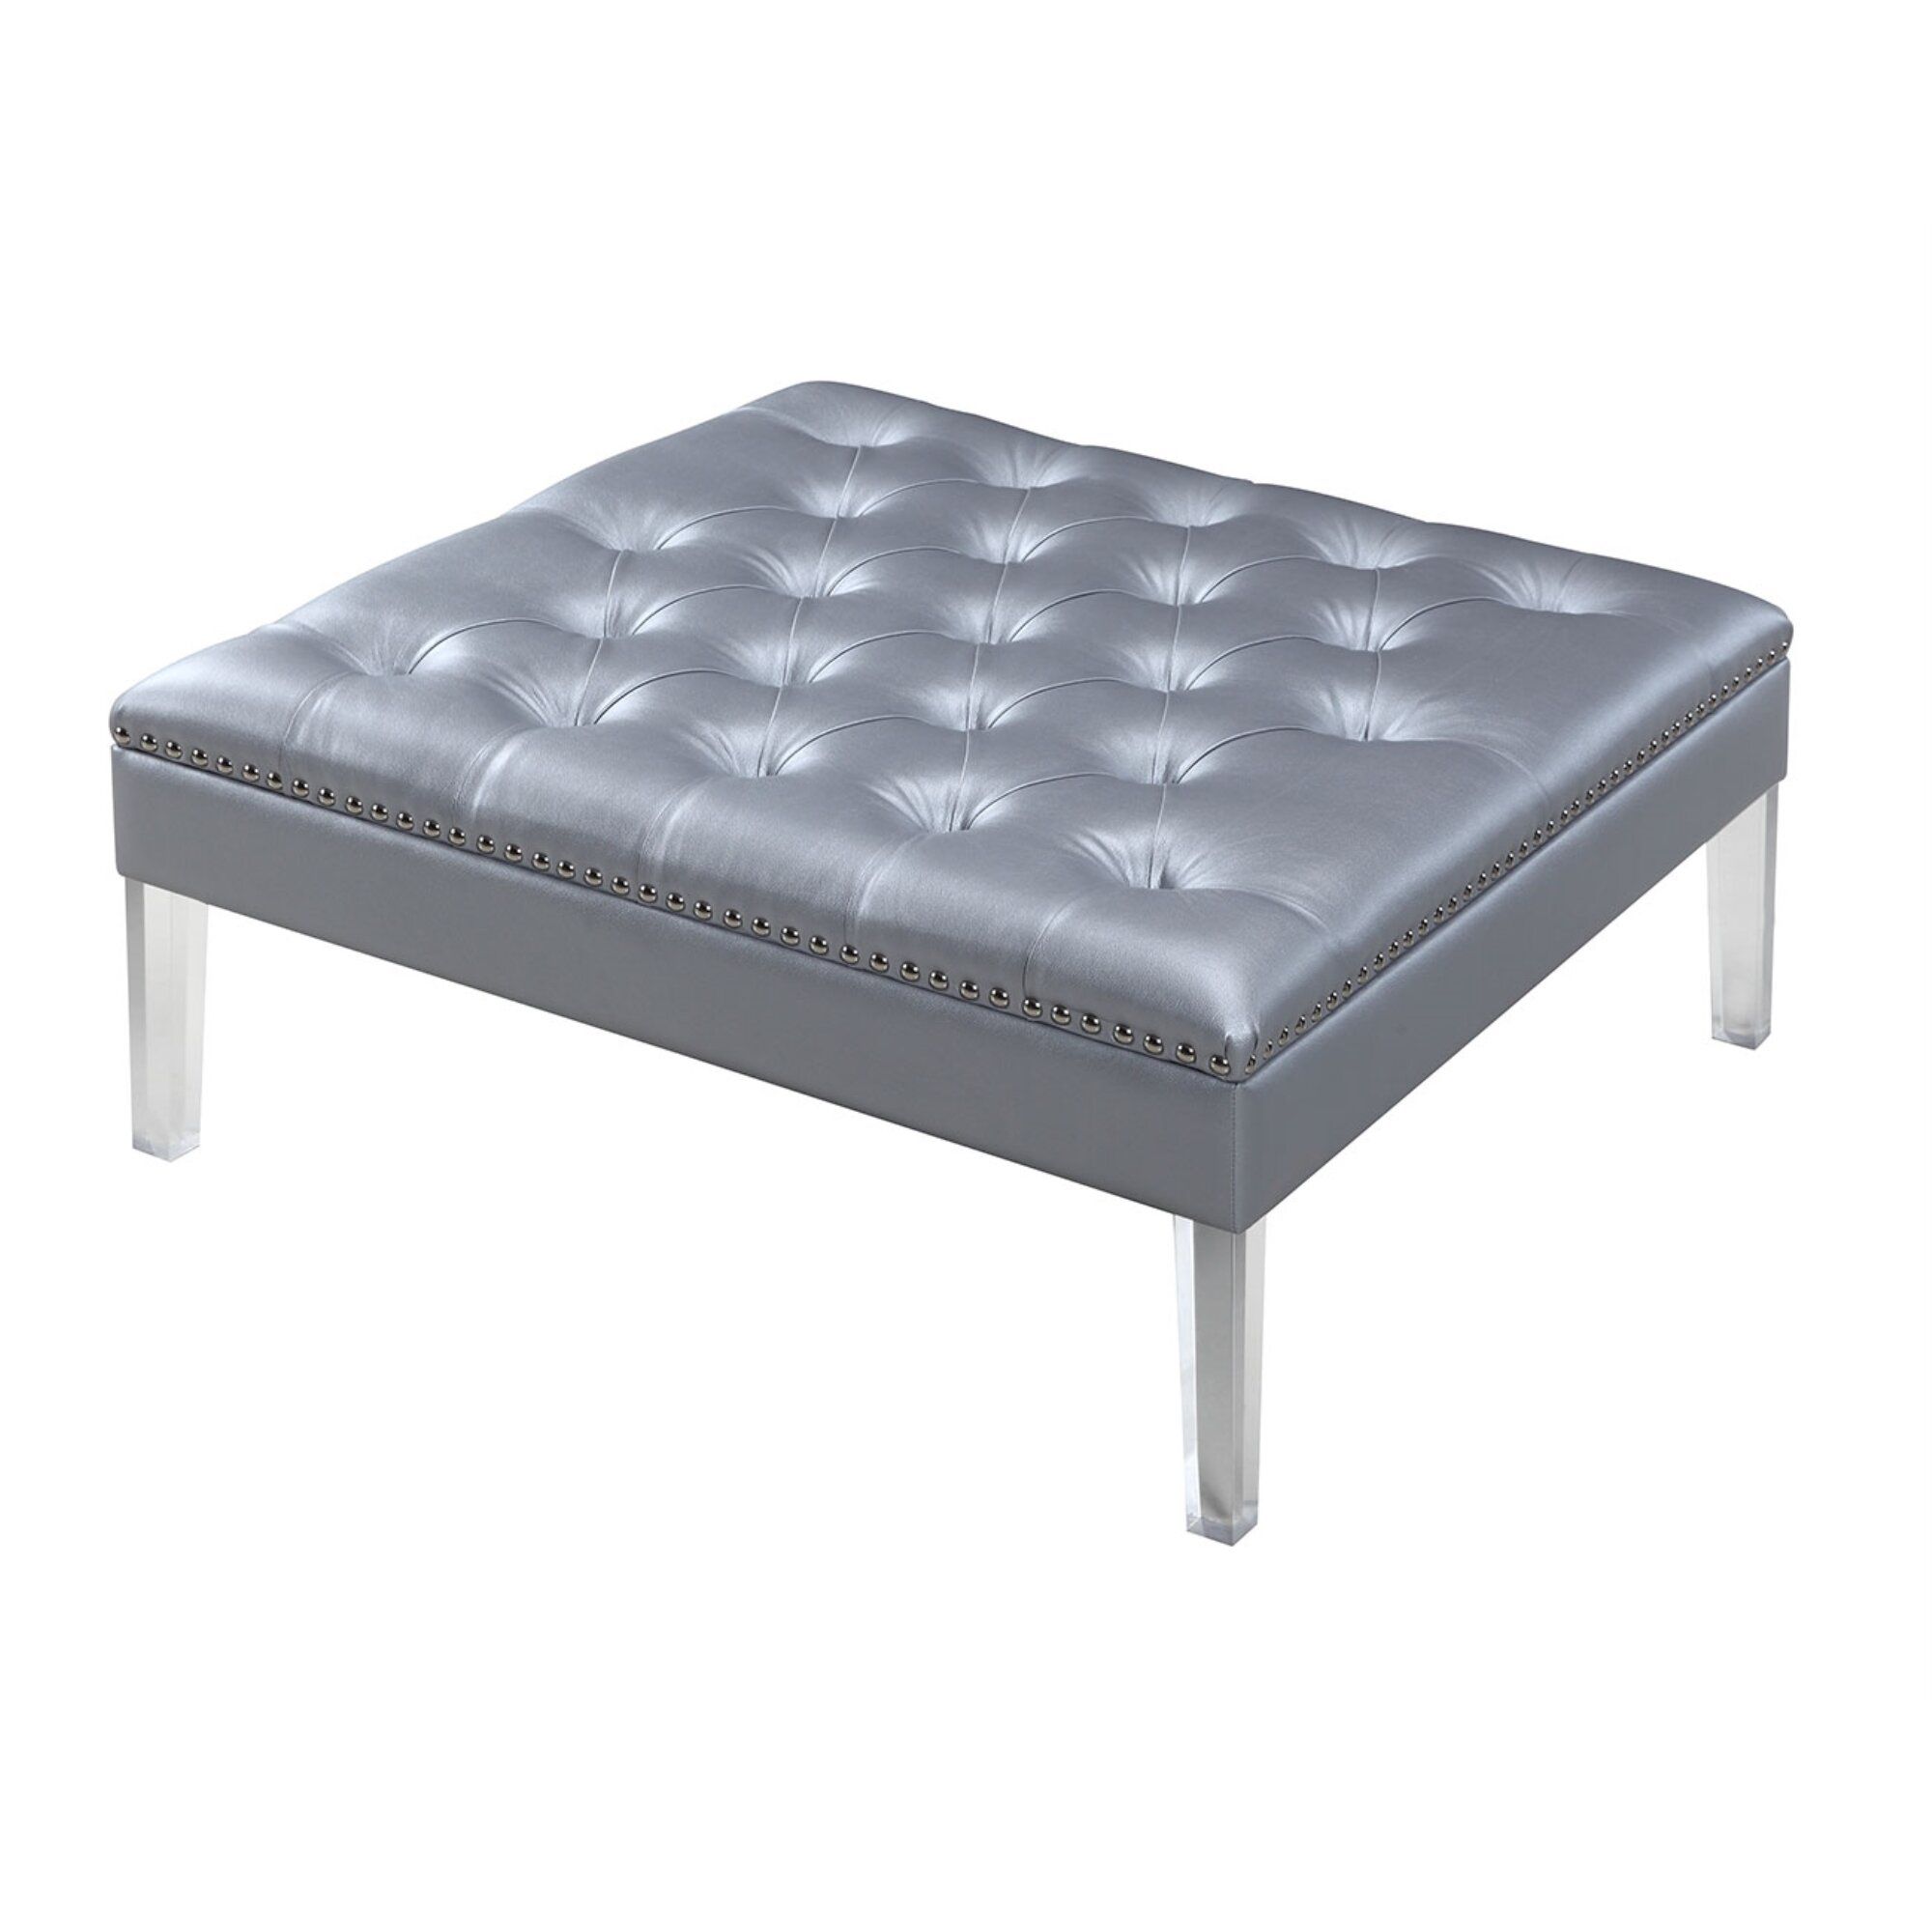 Iconic Home Twain Silver Nailhead Trim Button Tufted Acrylic Leg Throughout Weathered Silver Leather Hide Pouf Ottomans (View 15 of 20)